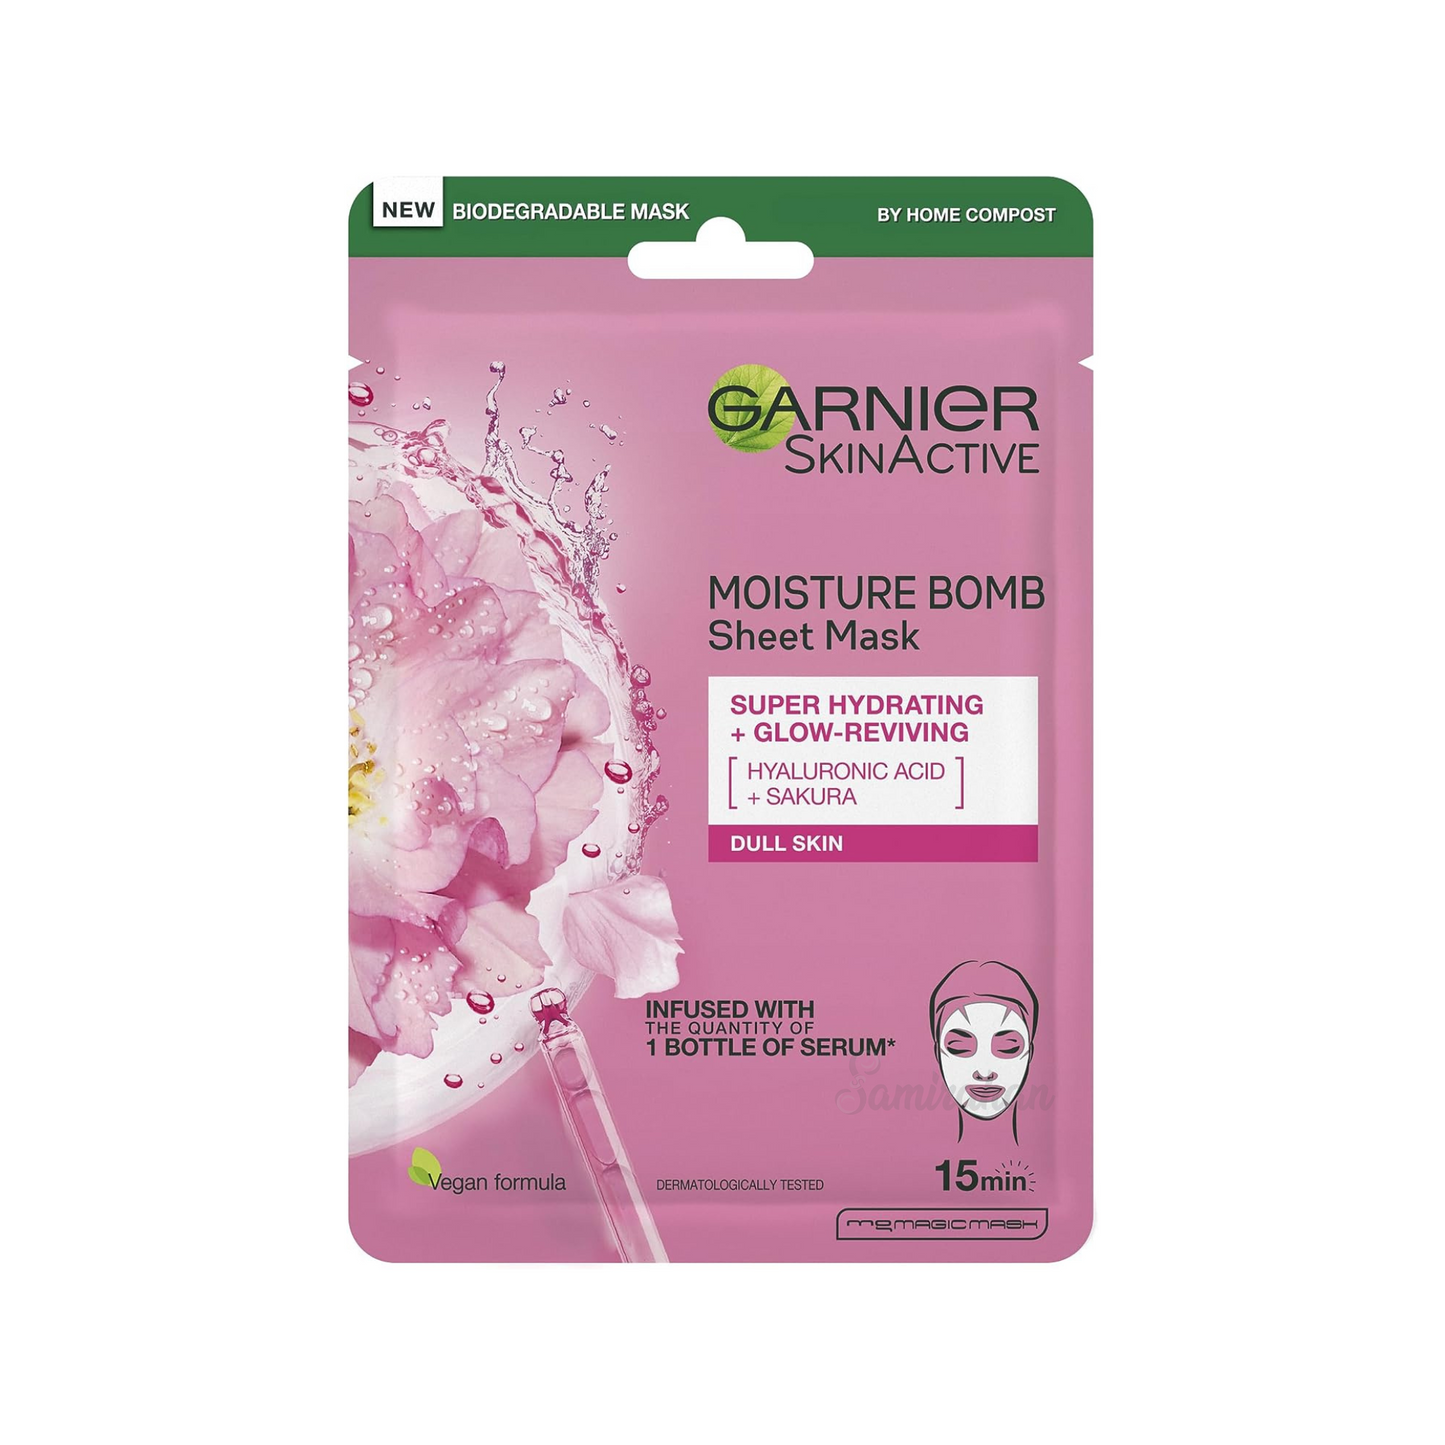 Garnier SkinActive Moisture Bomb is a super hydrating & revitalizing sheet mask. Contains Sakura plant extracts & hyaluronic acid, it leaves skin plump with moisture. Best imported foreign UK English British genuine authentic real skin care skincare premium beauty cheap price in Dhaka Chittagong Sylhet Bangladesh.